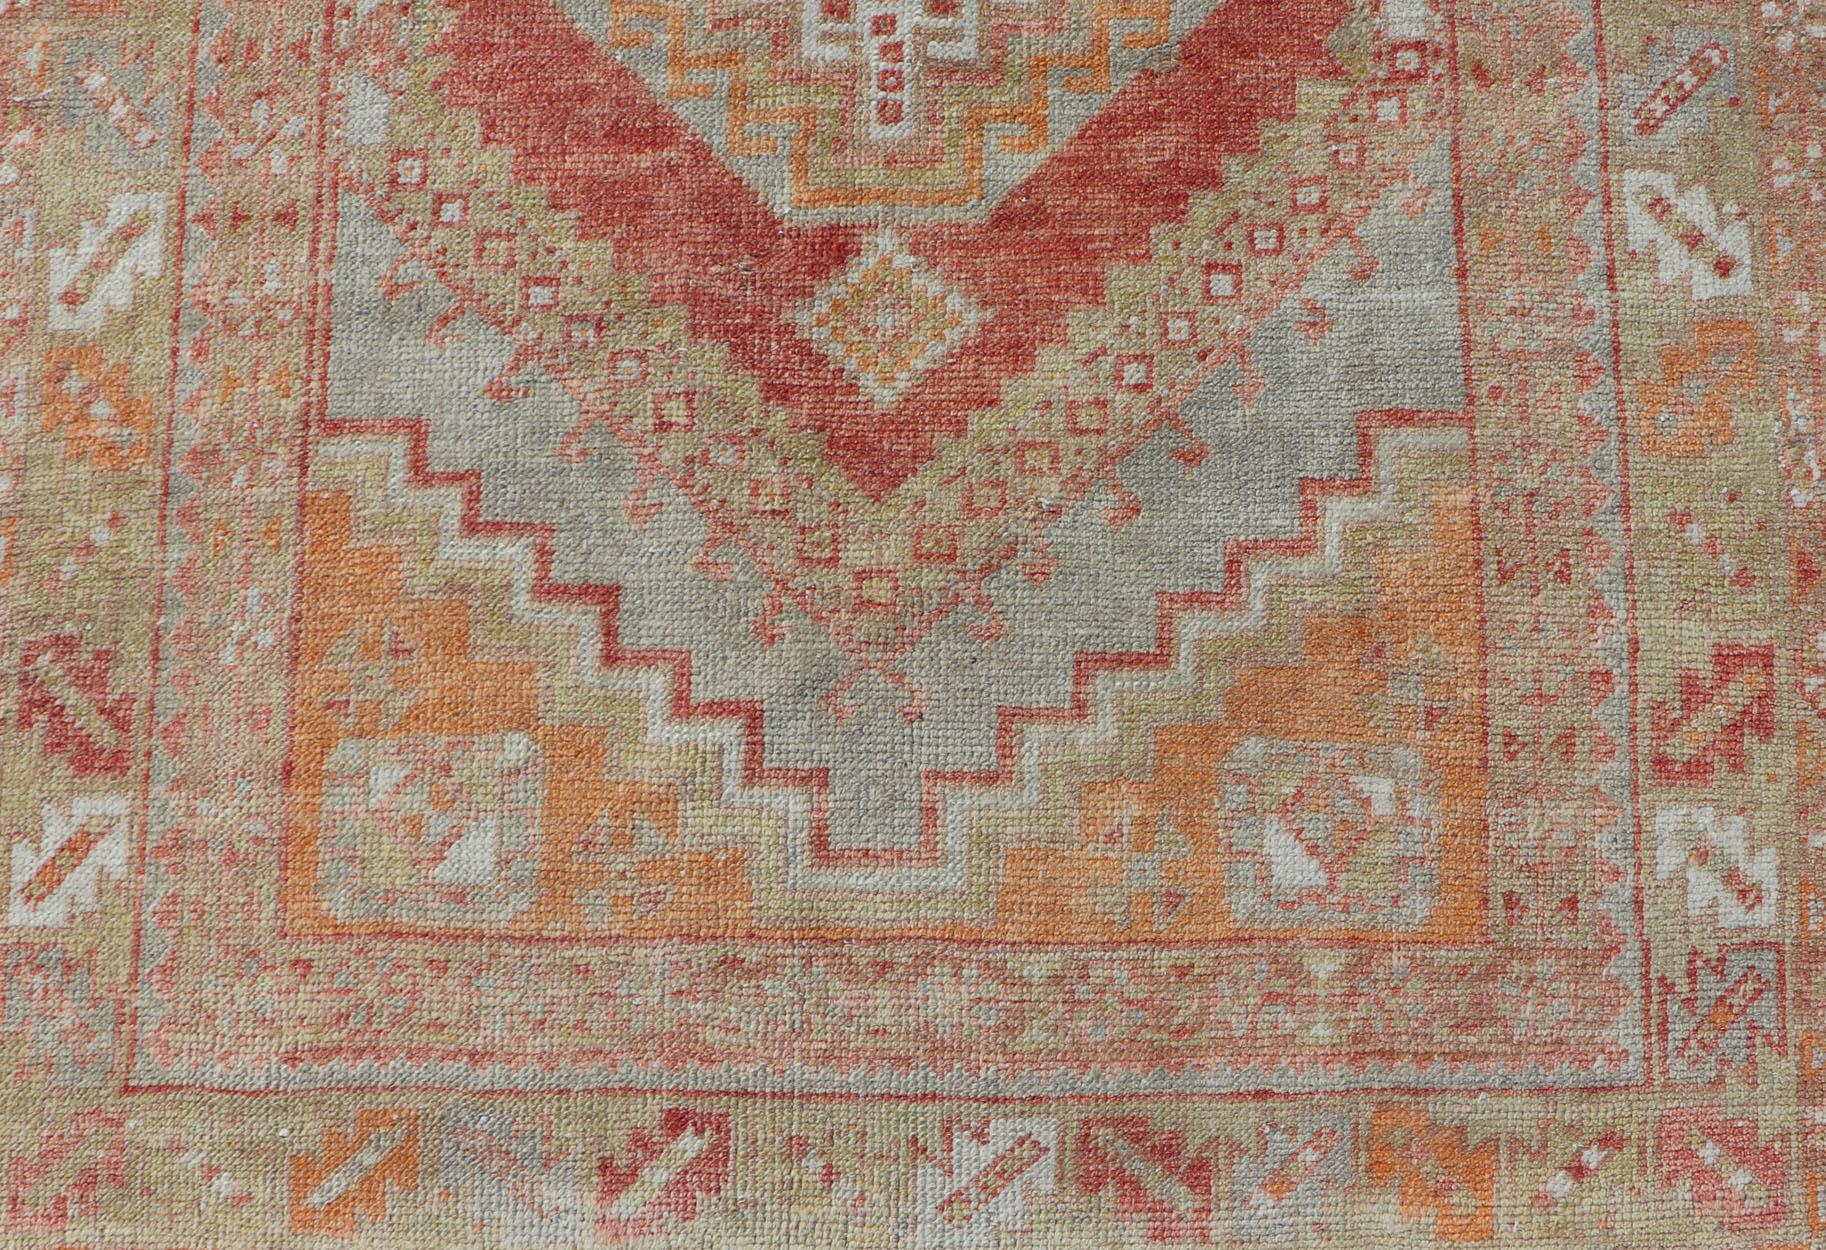 Measures: 3'7 x 5'7 
Turkish Vintage Oushak Rug With Medallion Design With Interconnected Motifs. Keivan Woven Arts rug / TU-MTU-4672, country of origin / type: Turkey / Oushak, circa 1940 

This vintage Turkish Oushak carpet (circa 1940) features a